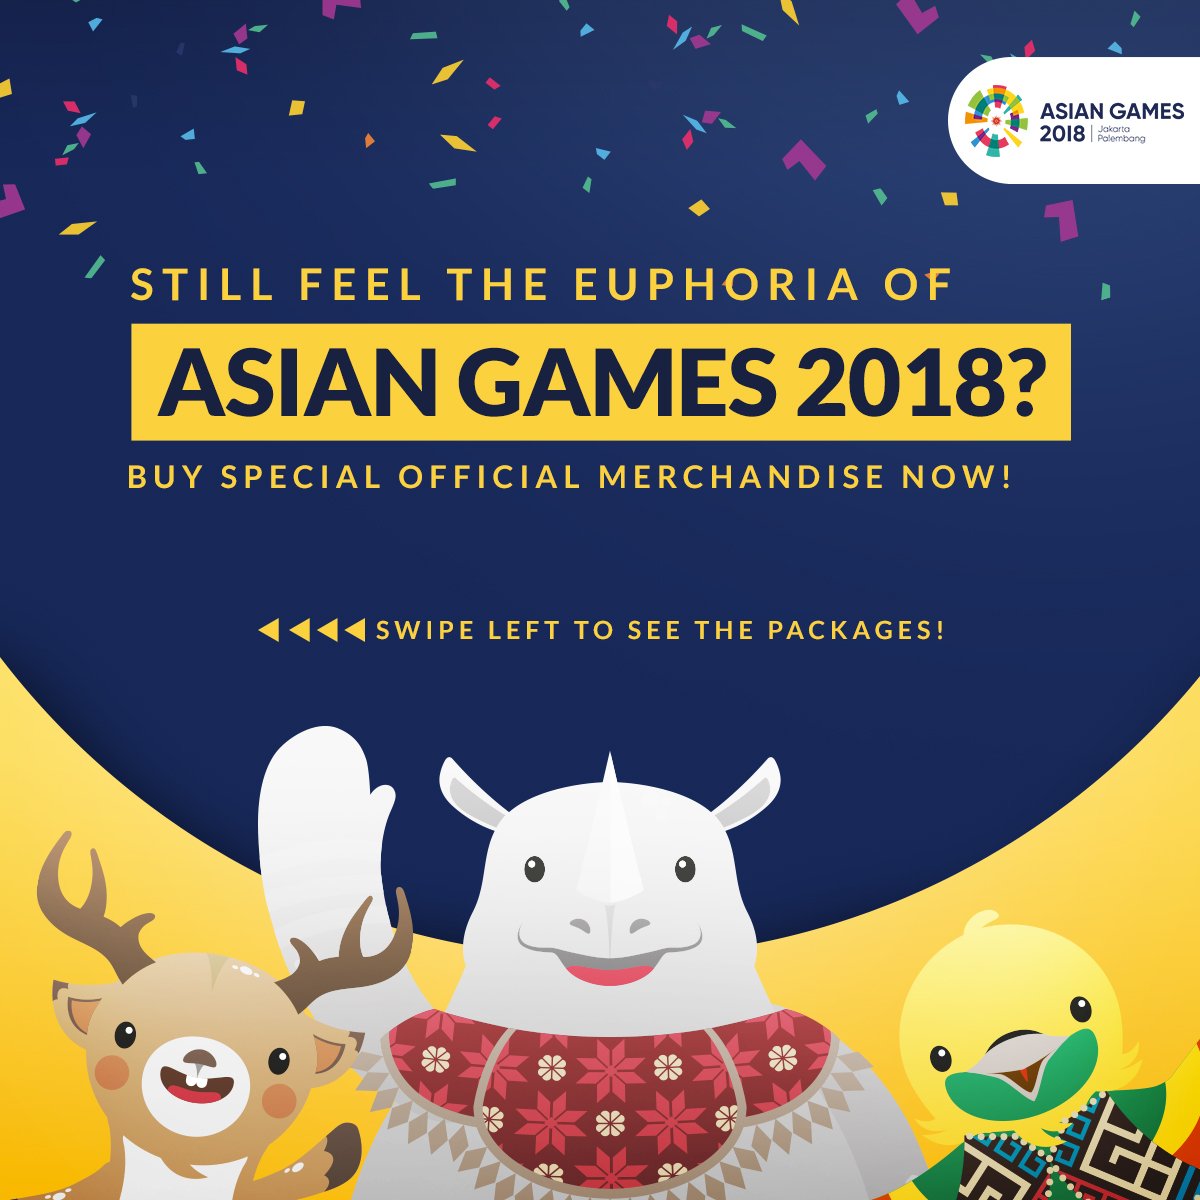 Asian Games 2018 Asiangames2018 Twitter